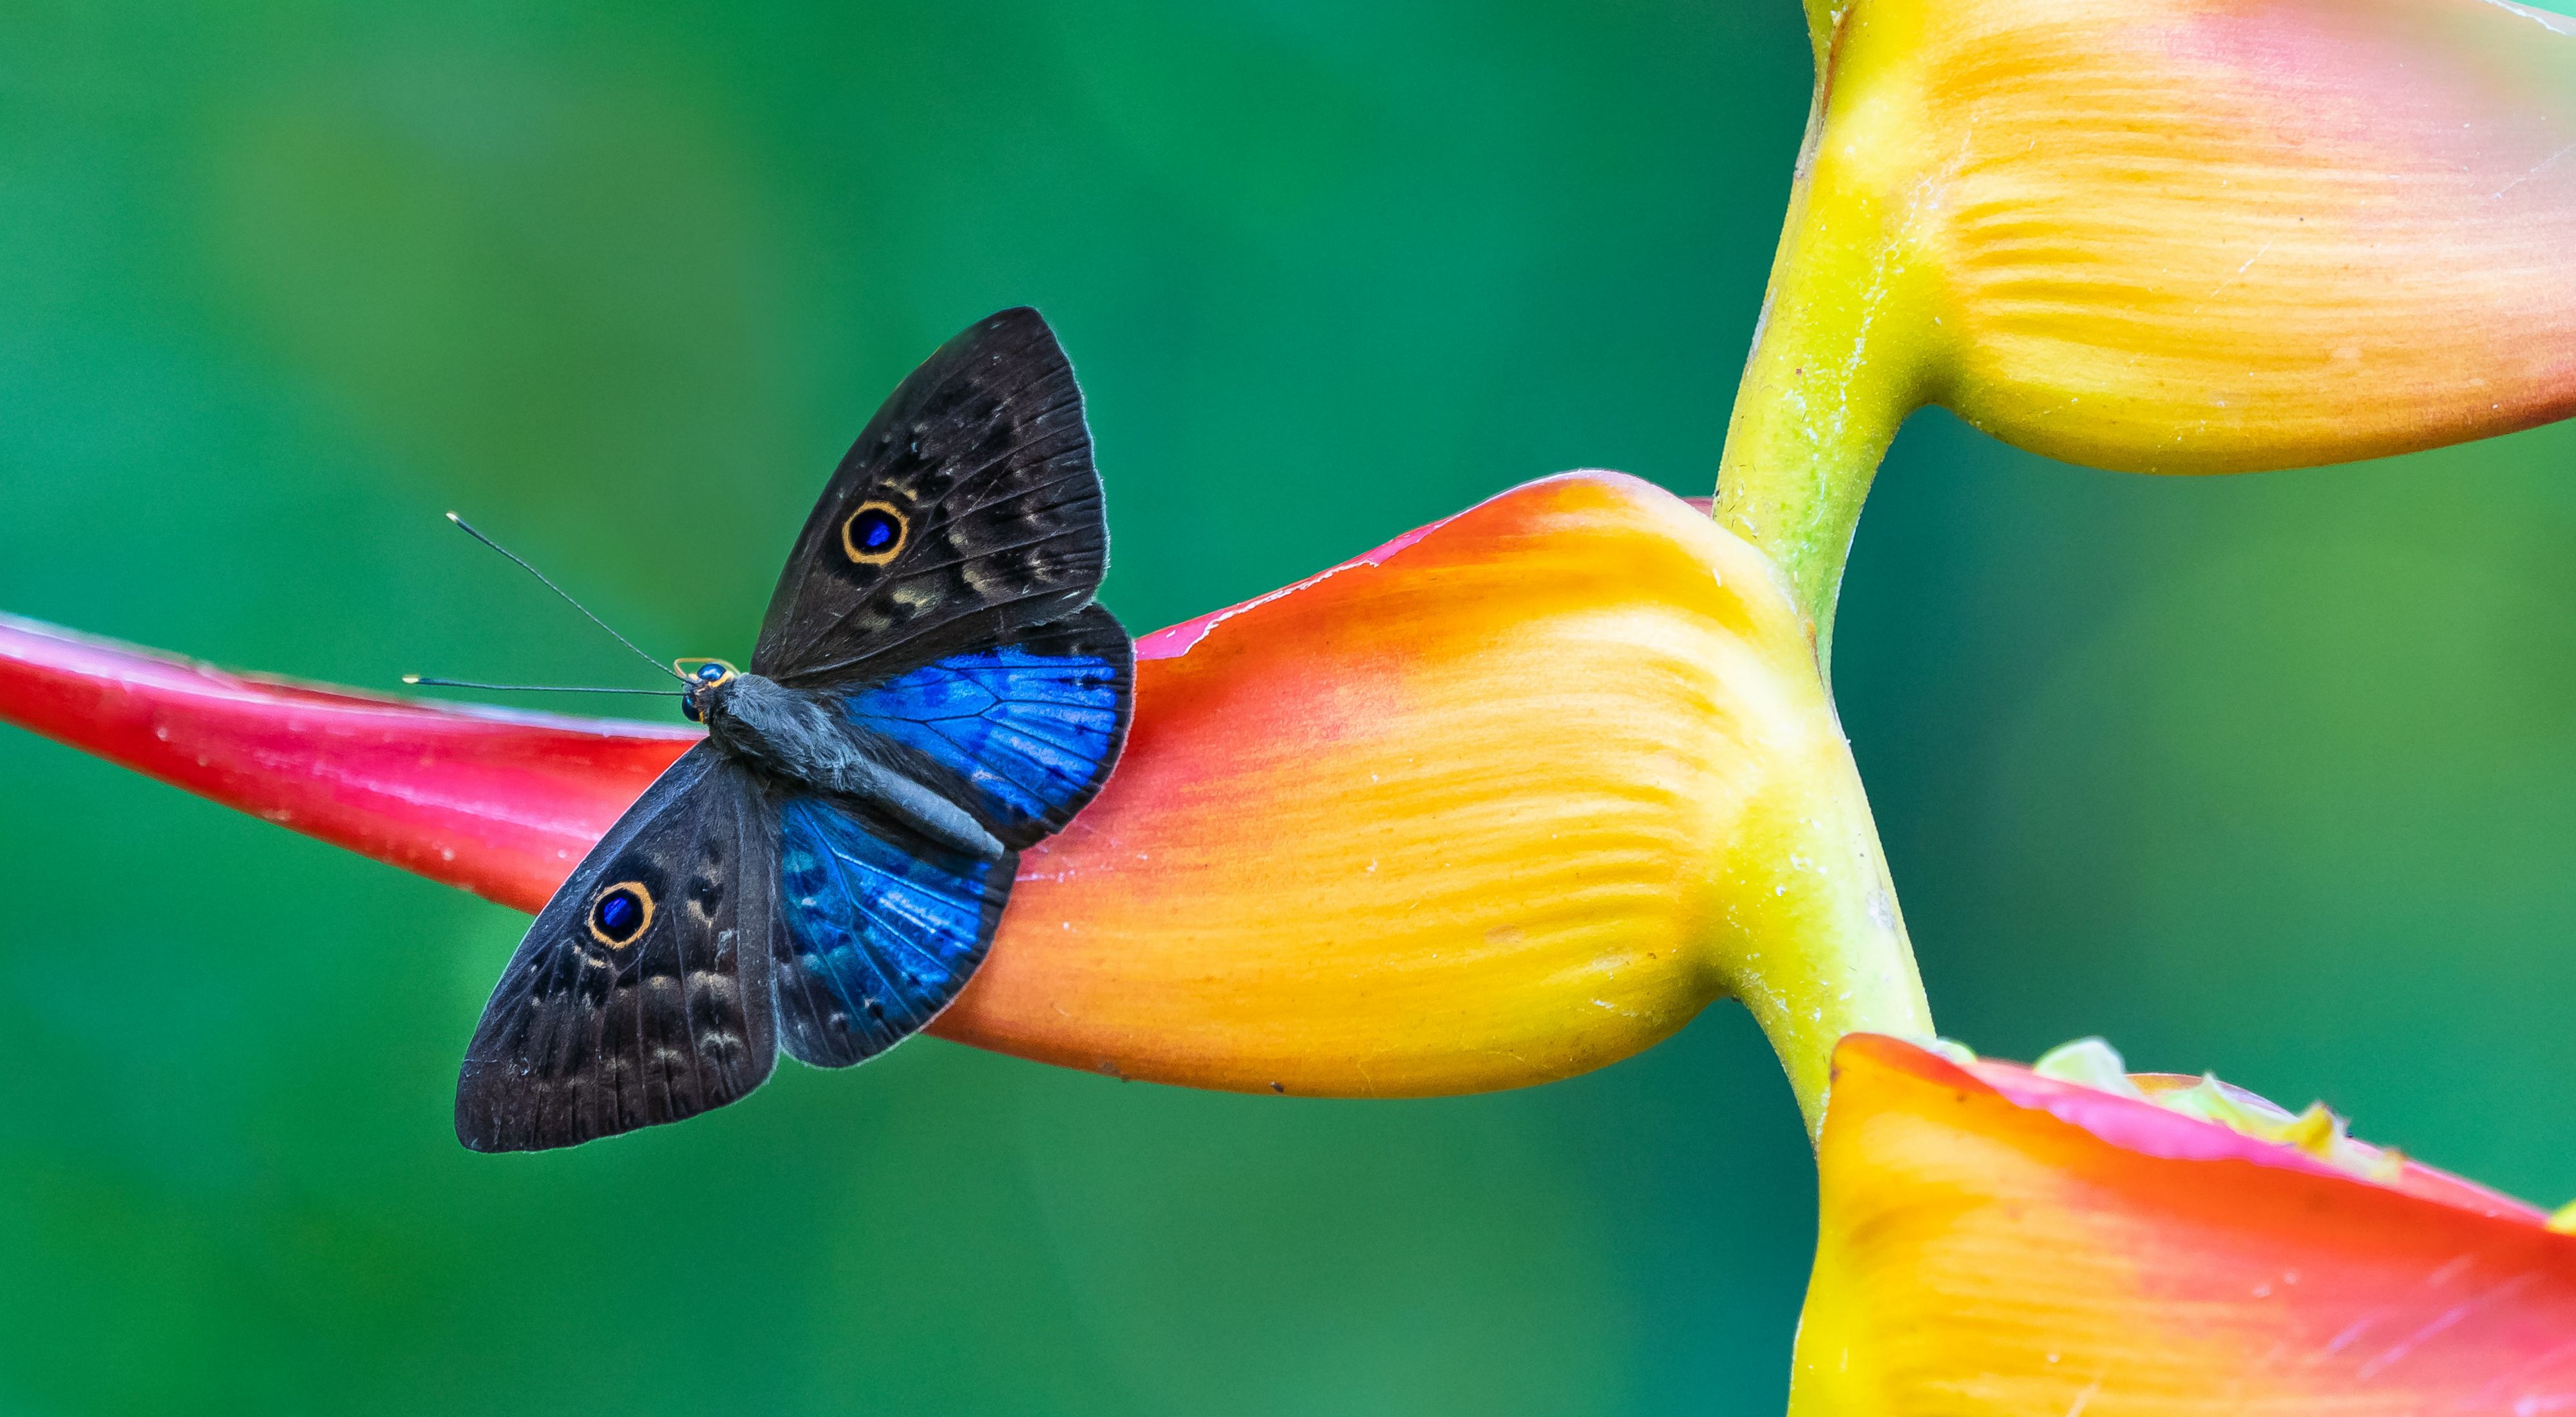 a blue and black butterfly rests on a colorful yellow and pink flower